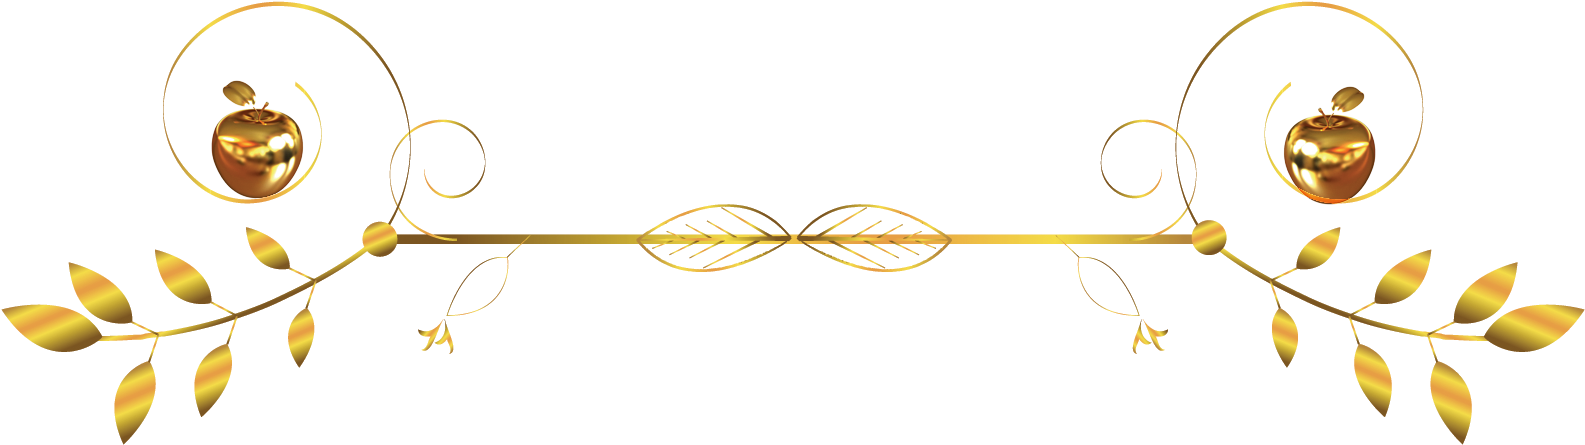 Gold Divider Png - Gold Text Dividers Png (1624x488), Png Download